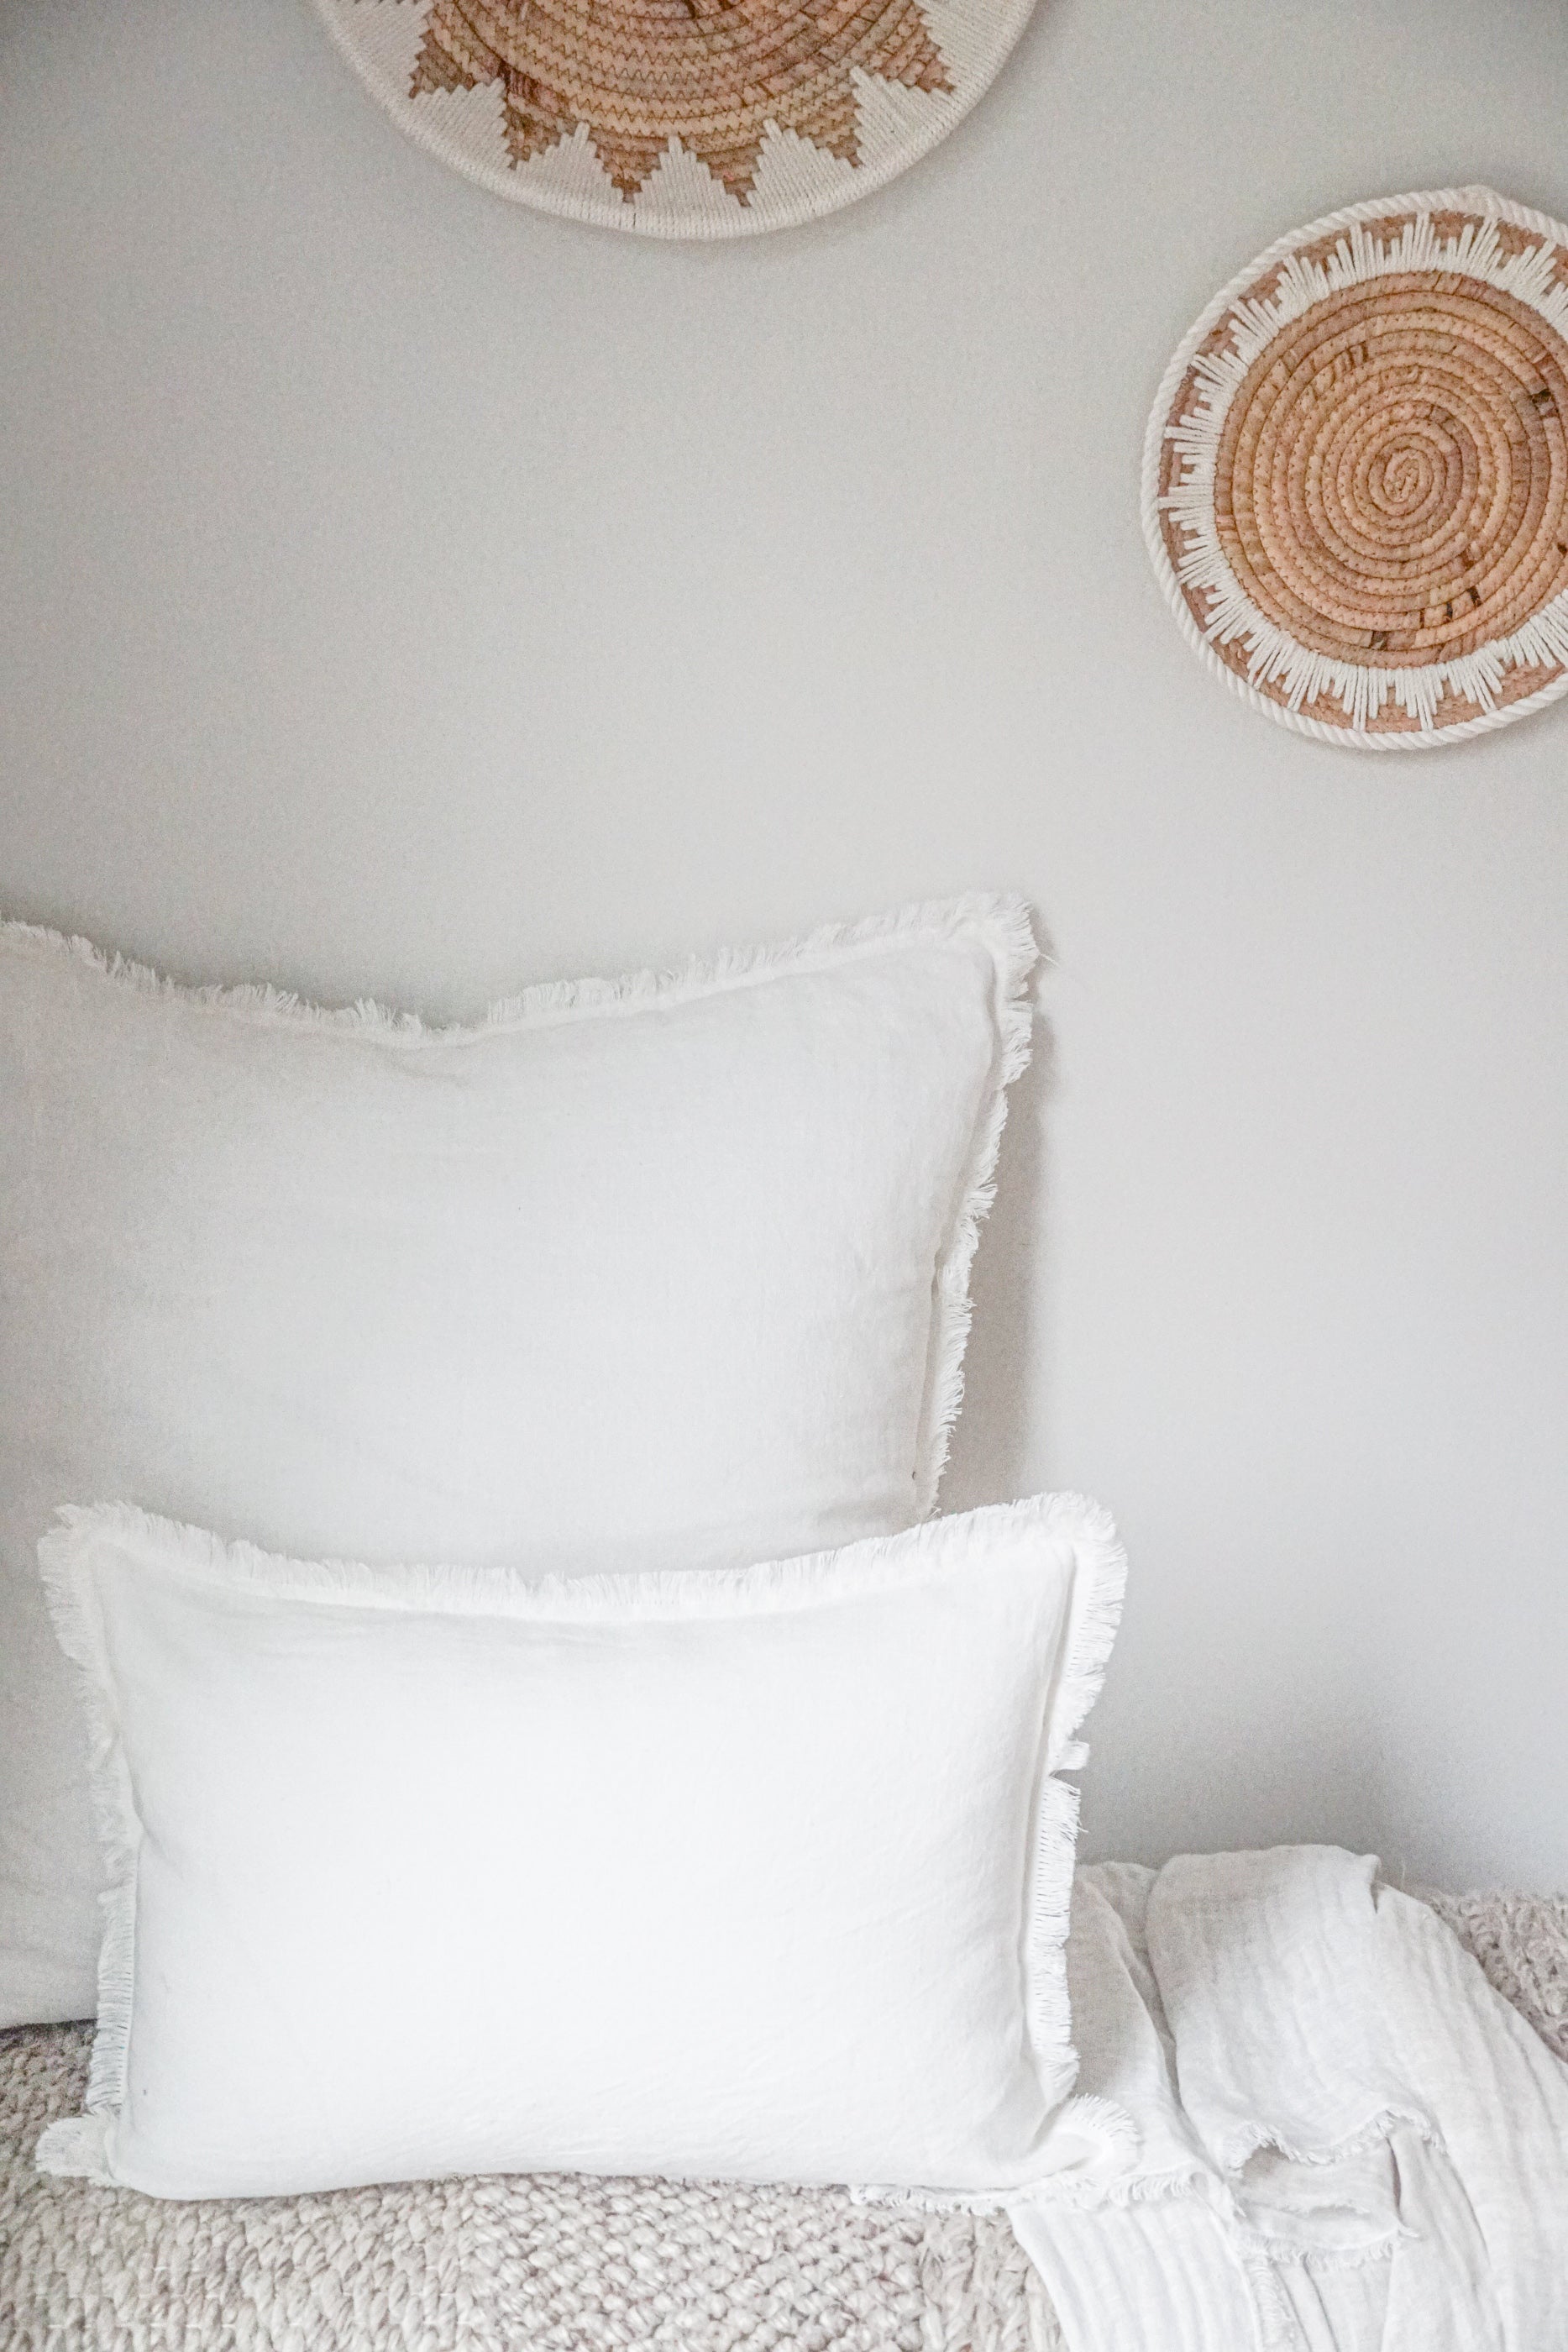 Buy White So Soft Linen Pillows by Anaya